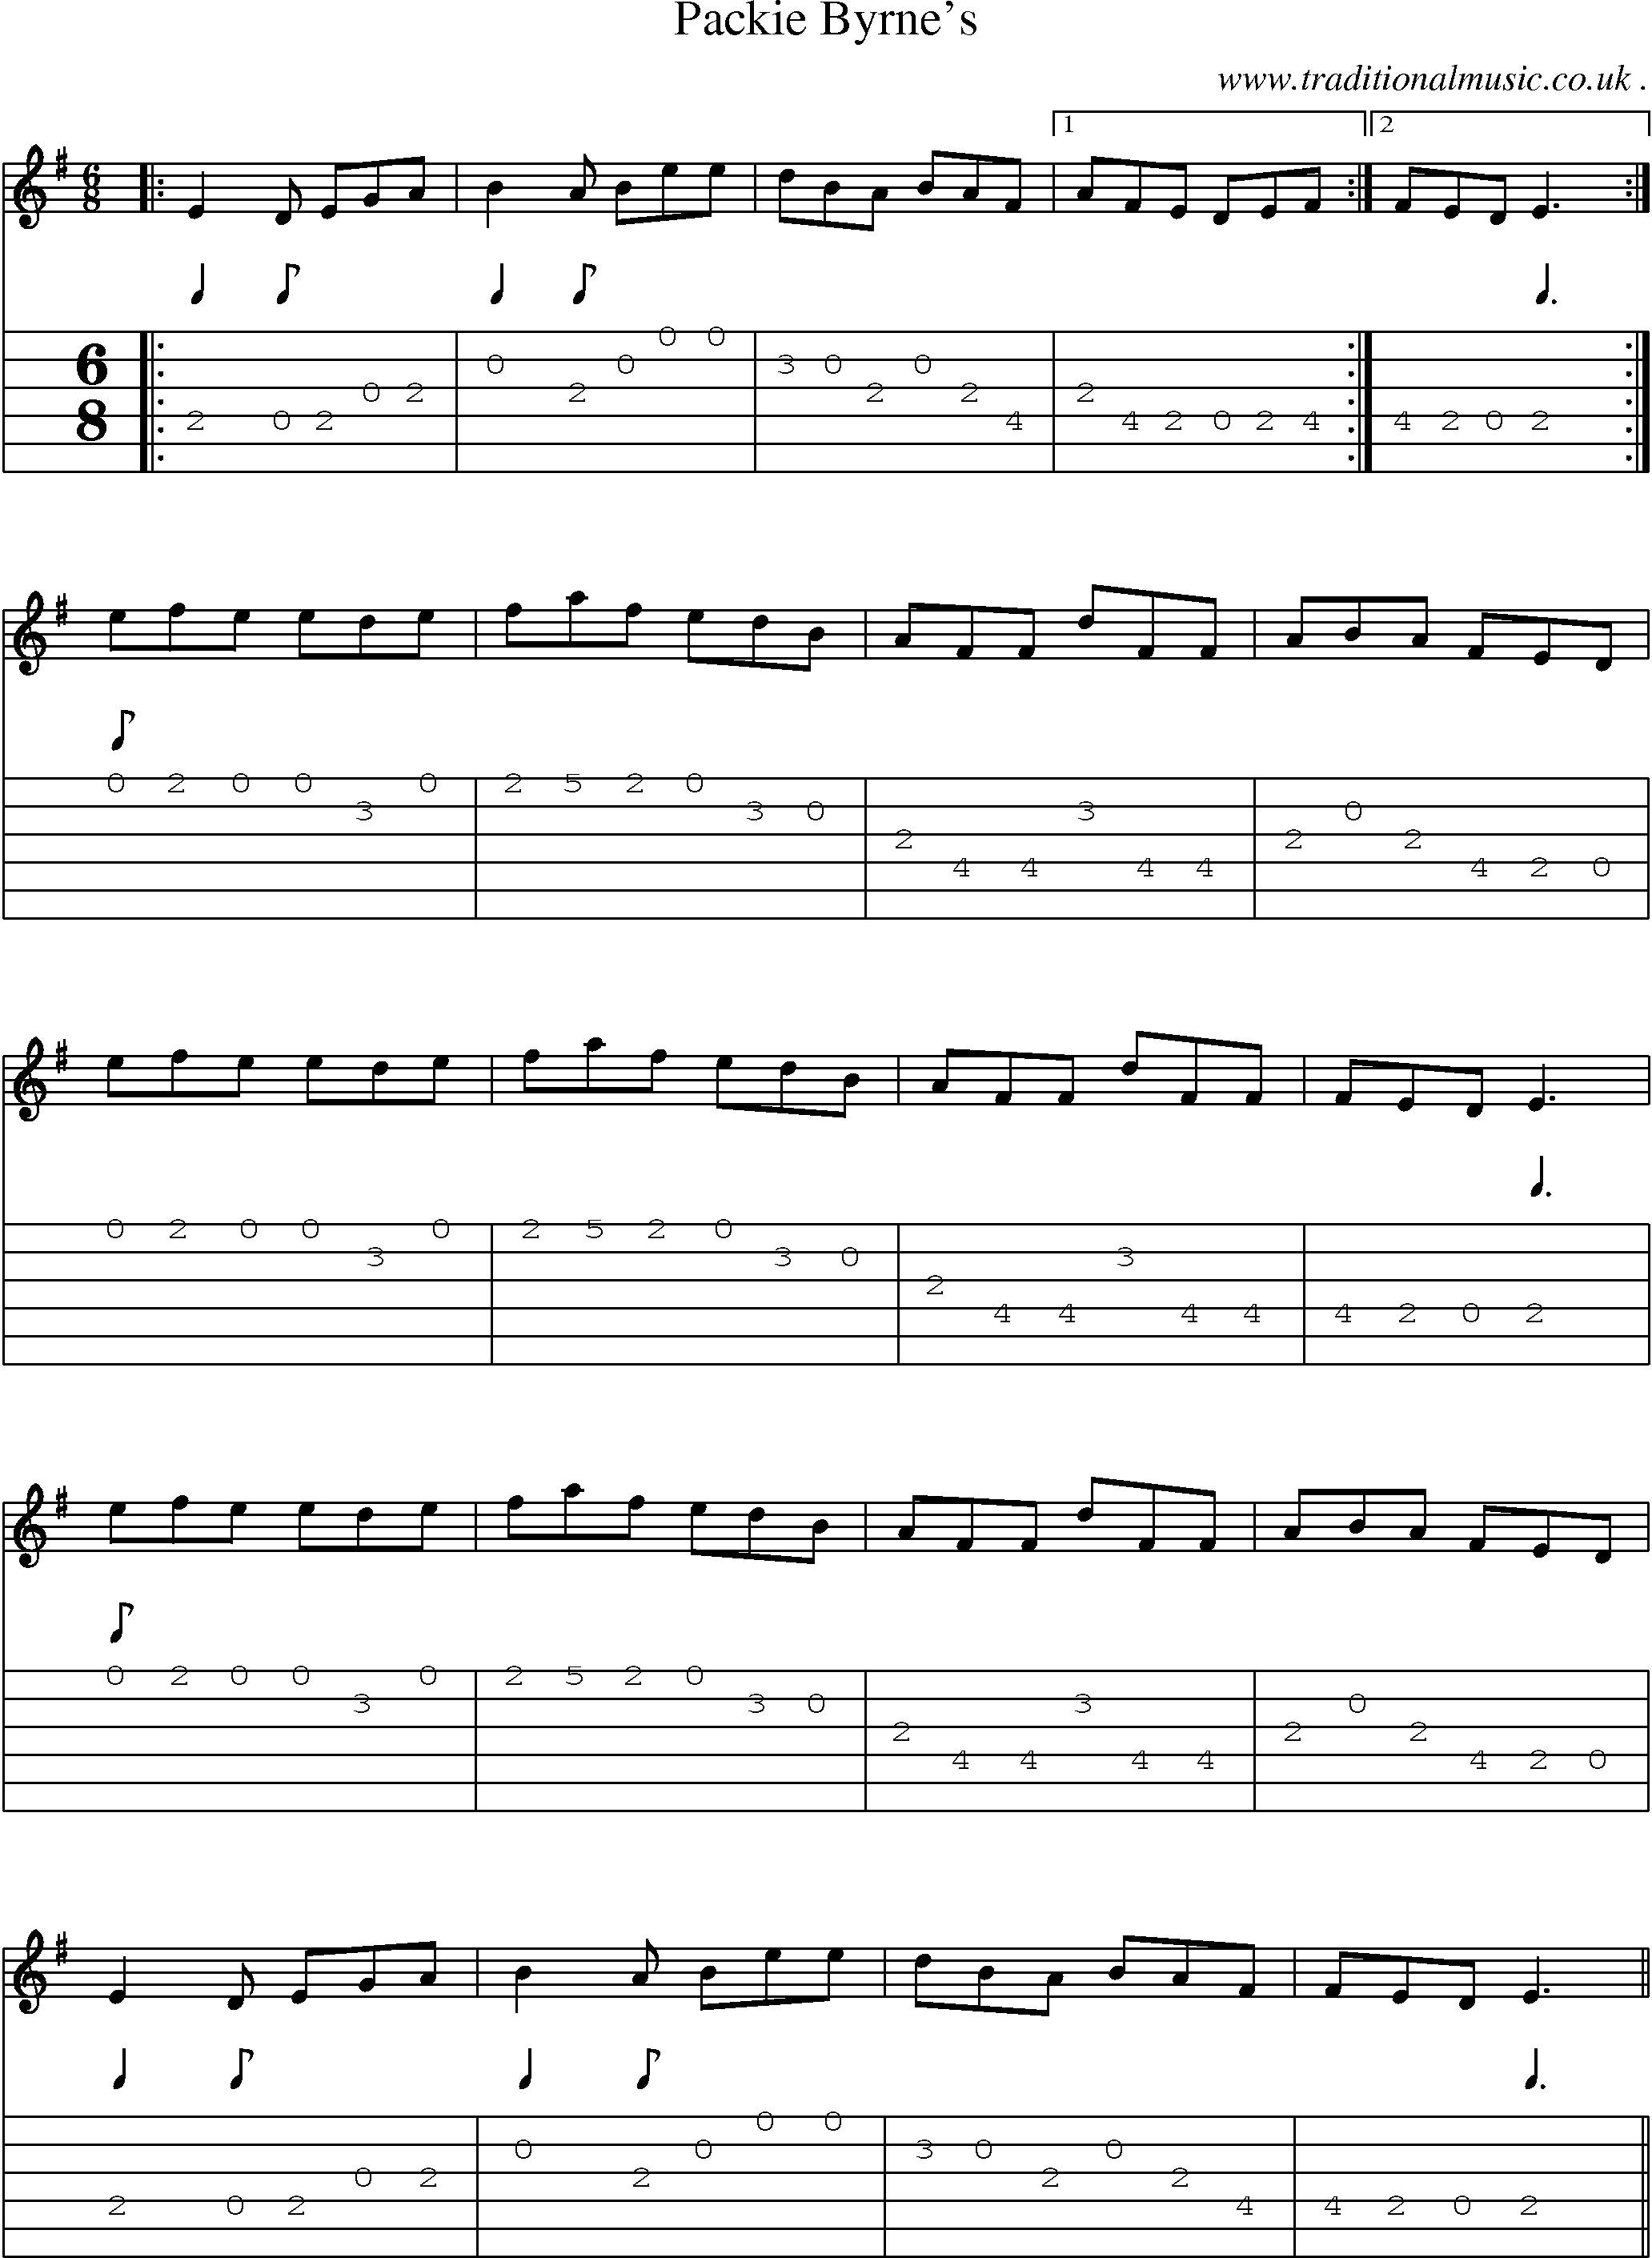 Sheet-Music and Guitar Tabs for Packie Byrnes